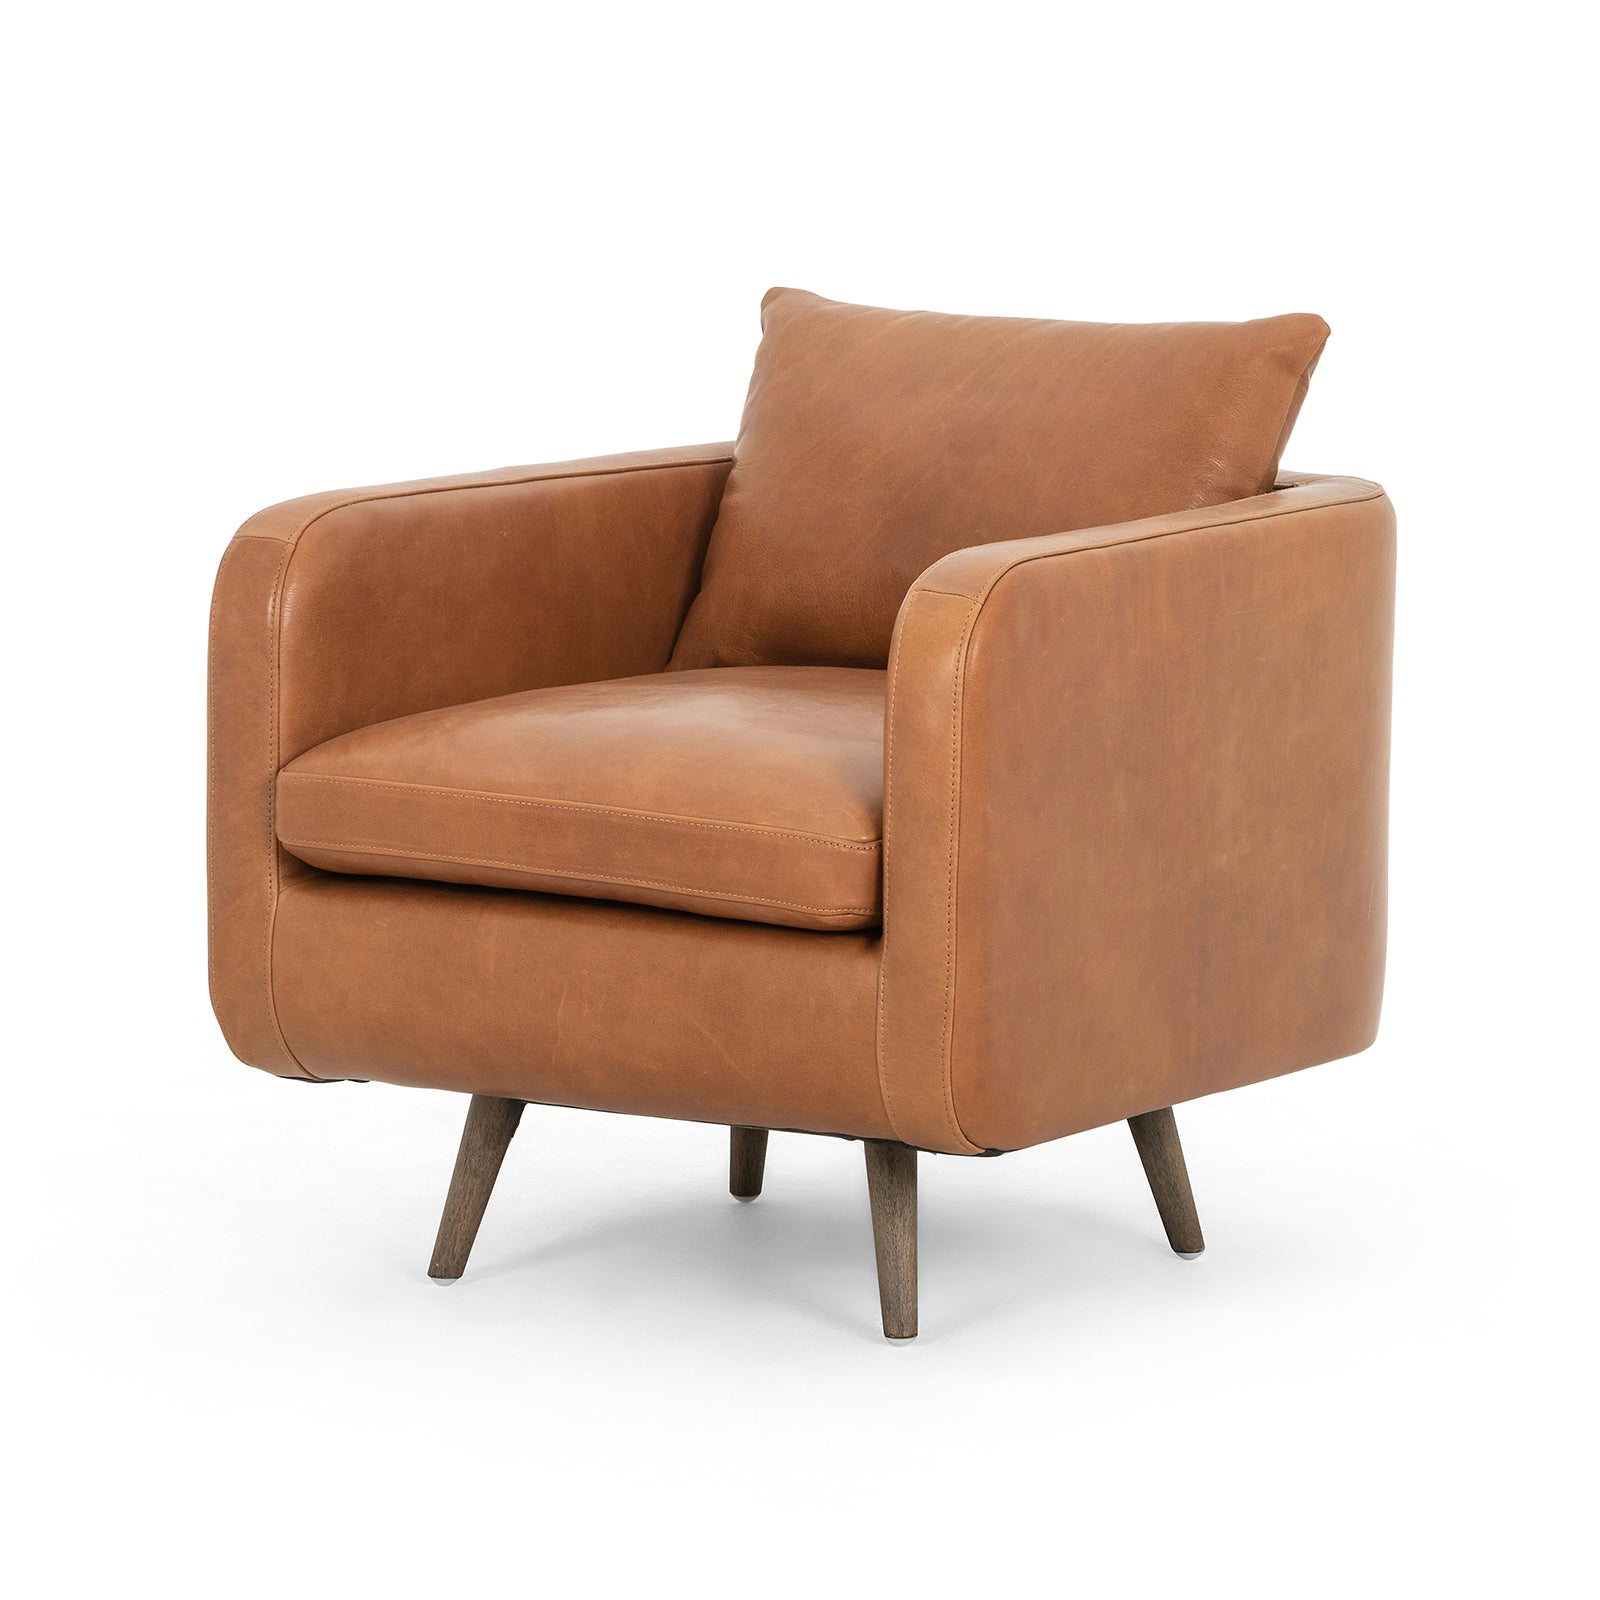 Kailey Leather Swivel Chair